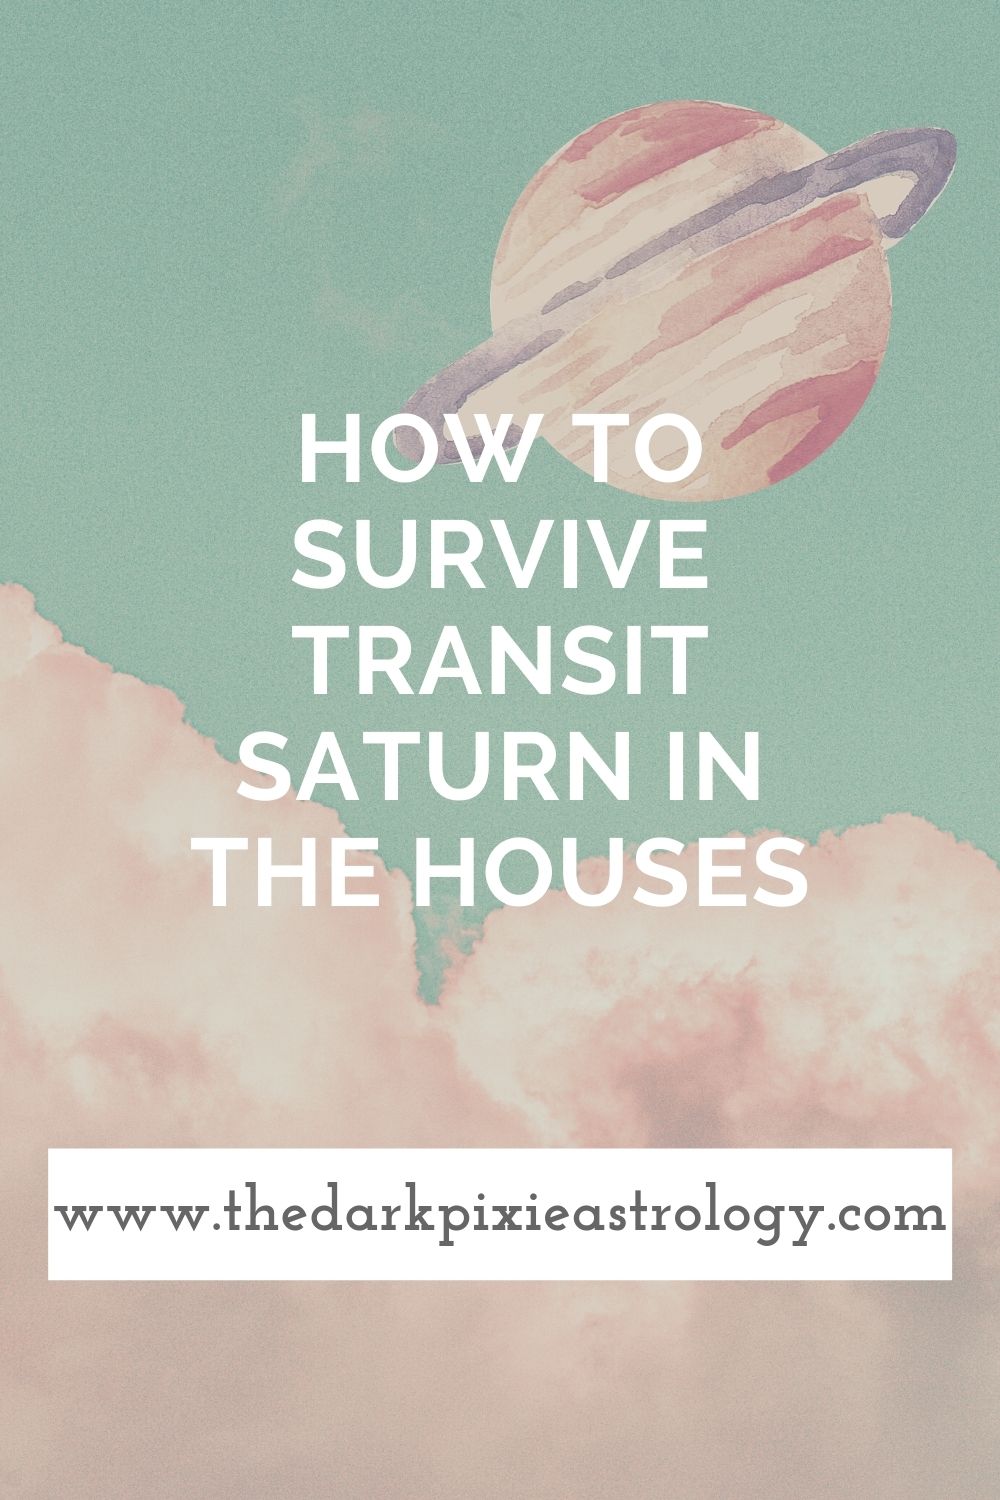 How to Survive Transit Saturn in the Houses - The Dark Pixie Astrology